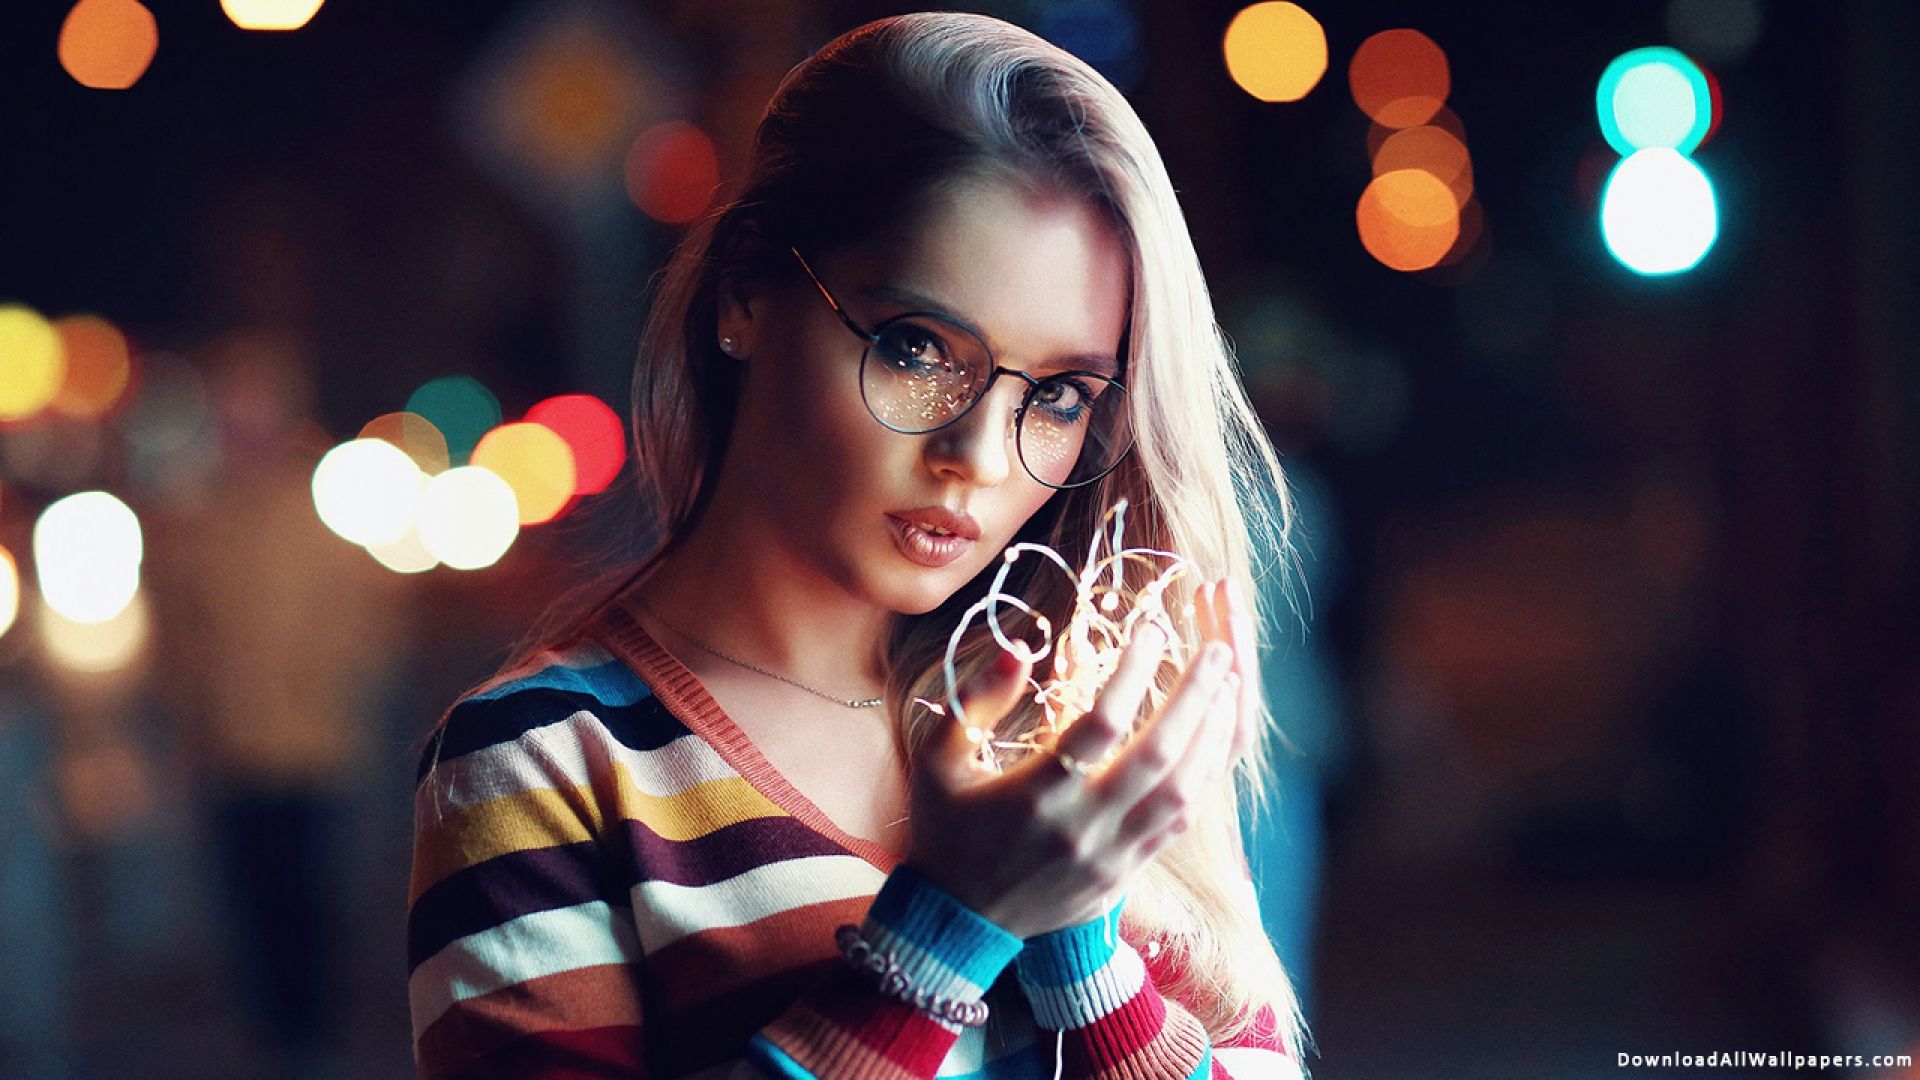 Beautiful Girl In Spectacles Holding Fairy Light, Girl Holding